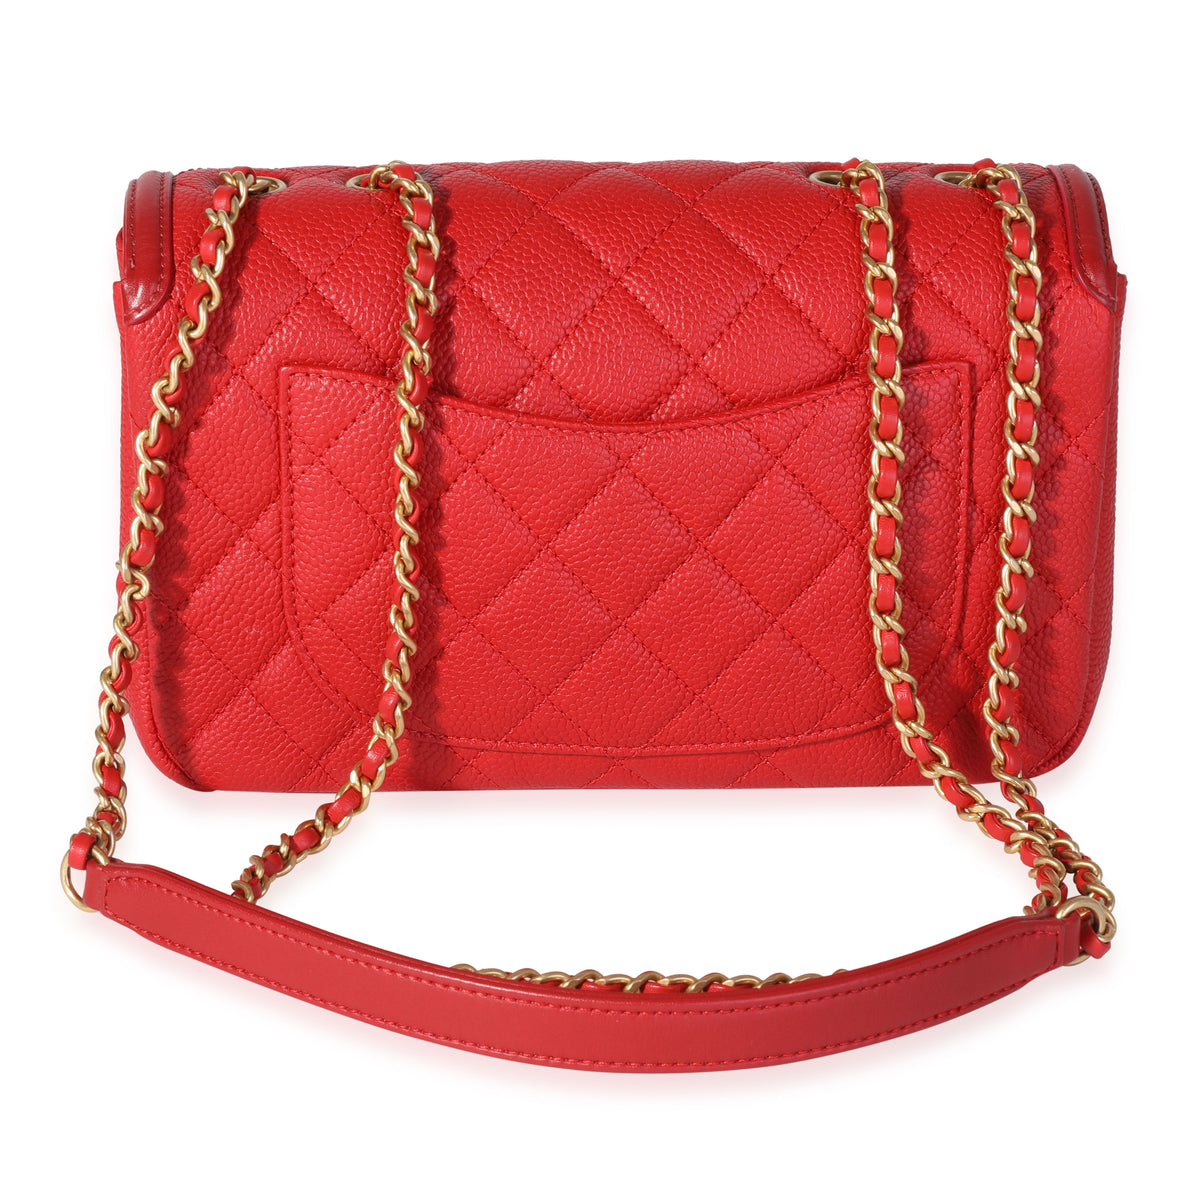 Chanel Red Caviar Quilted Small CC Filigree Flap Bag, myGemma